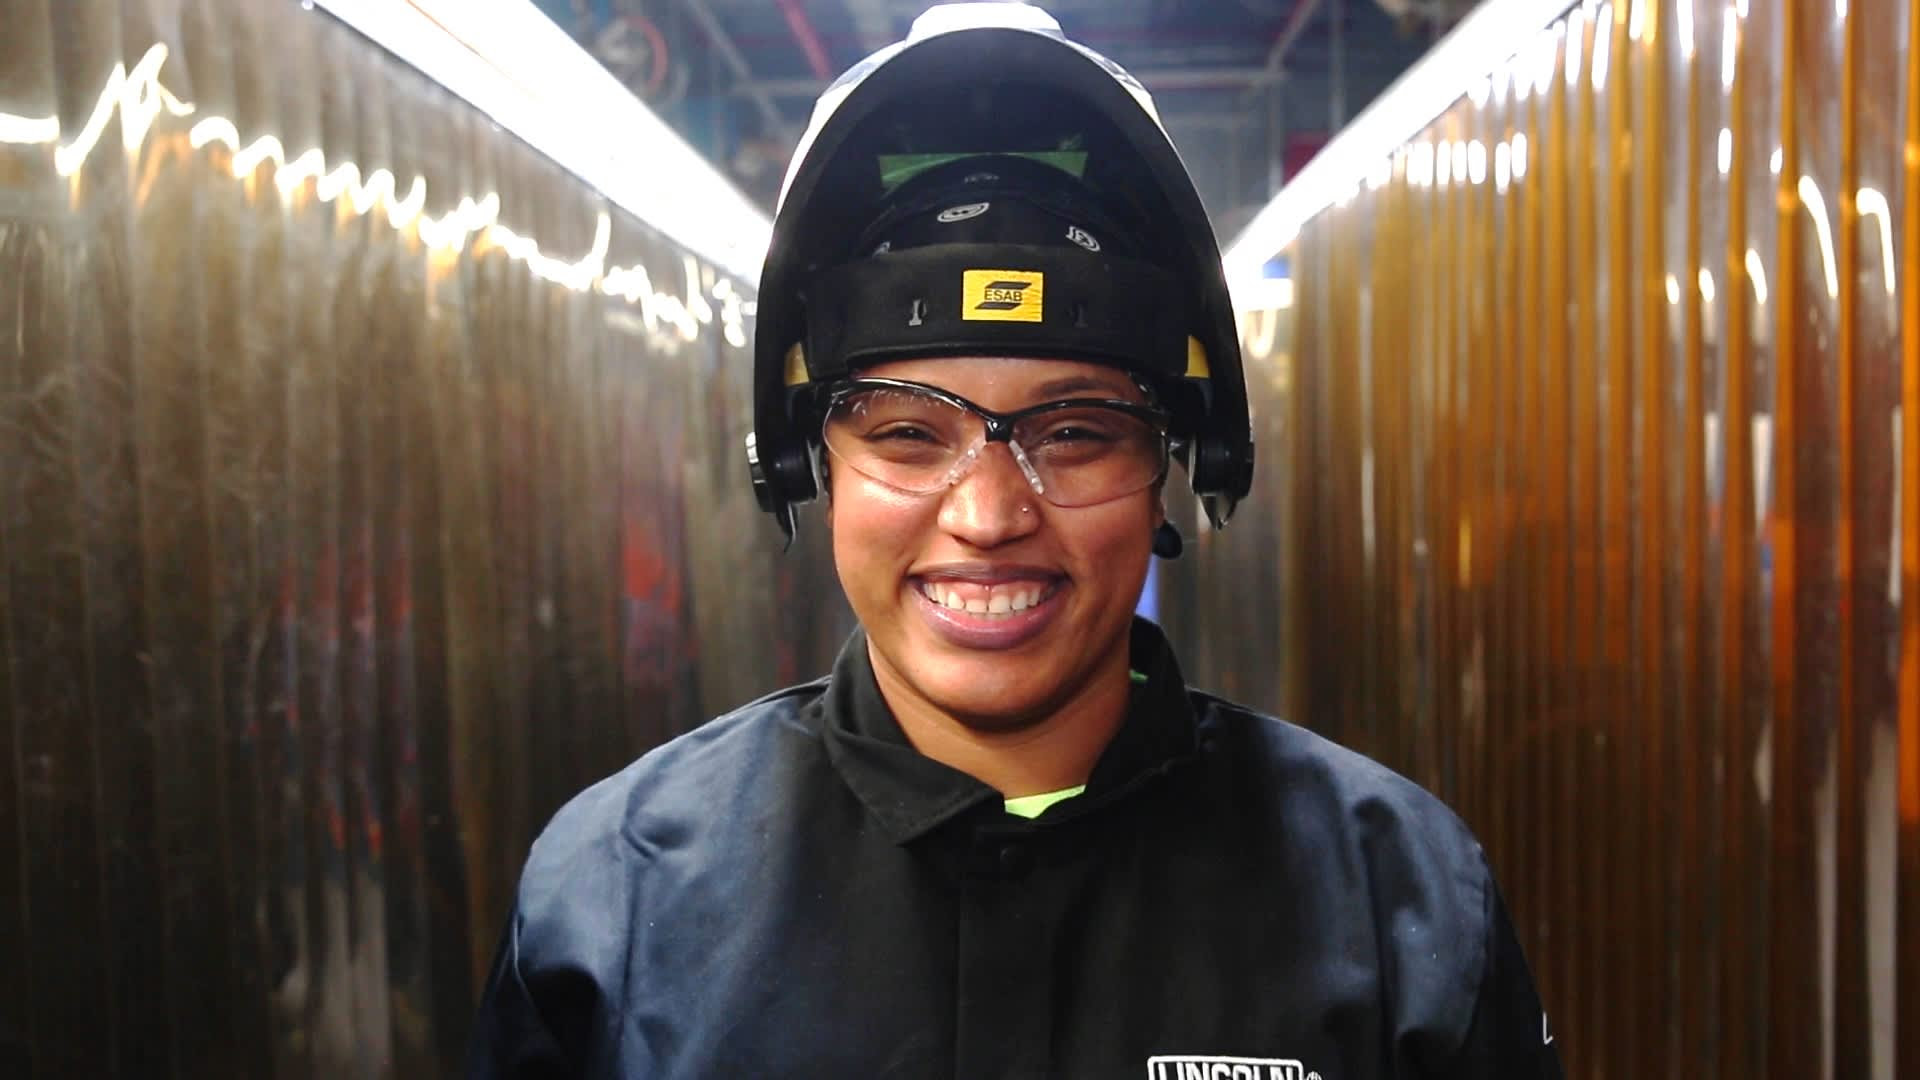 On the job: What it takes to earn $100,000 a year as an ironworker in New York